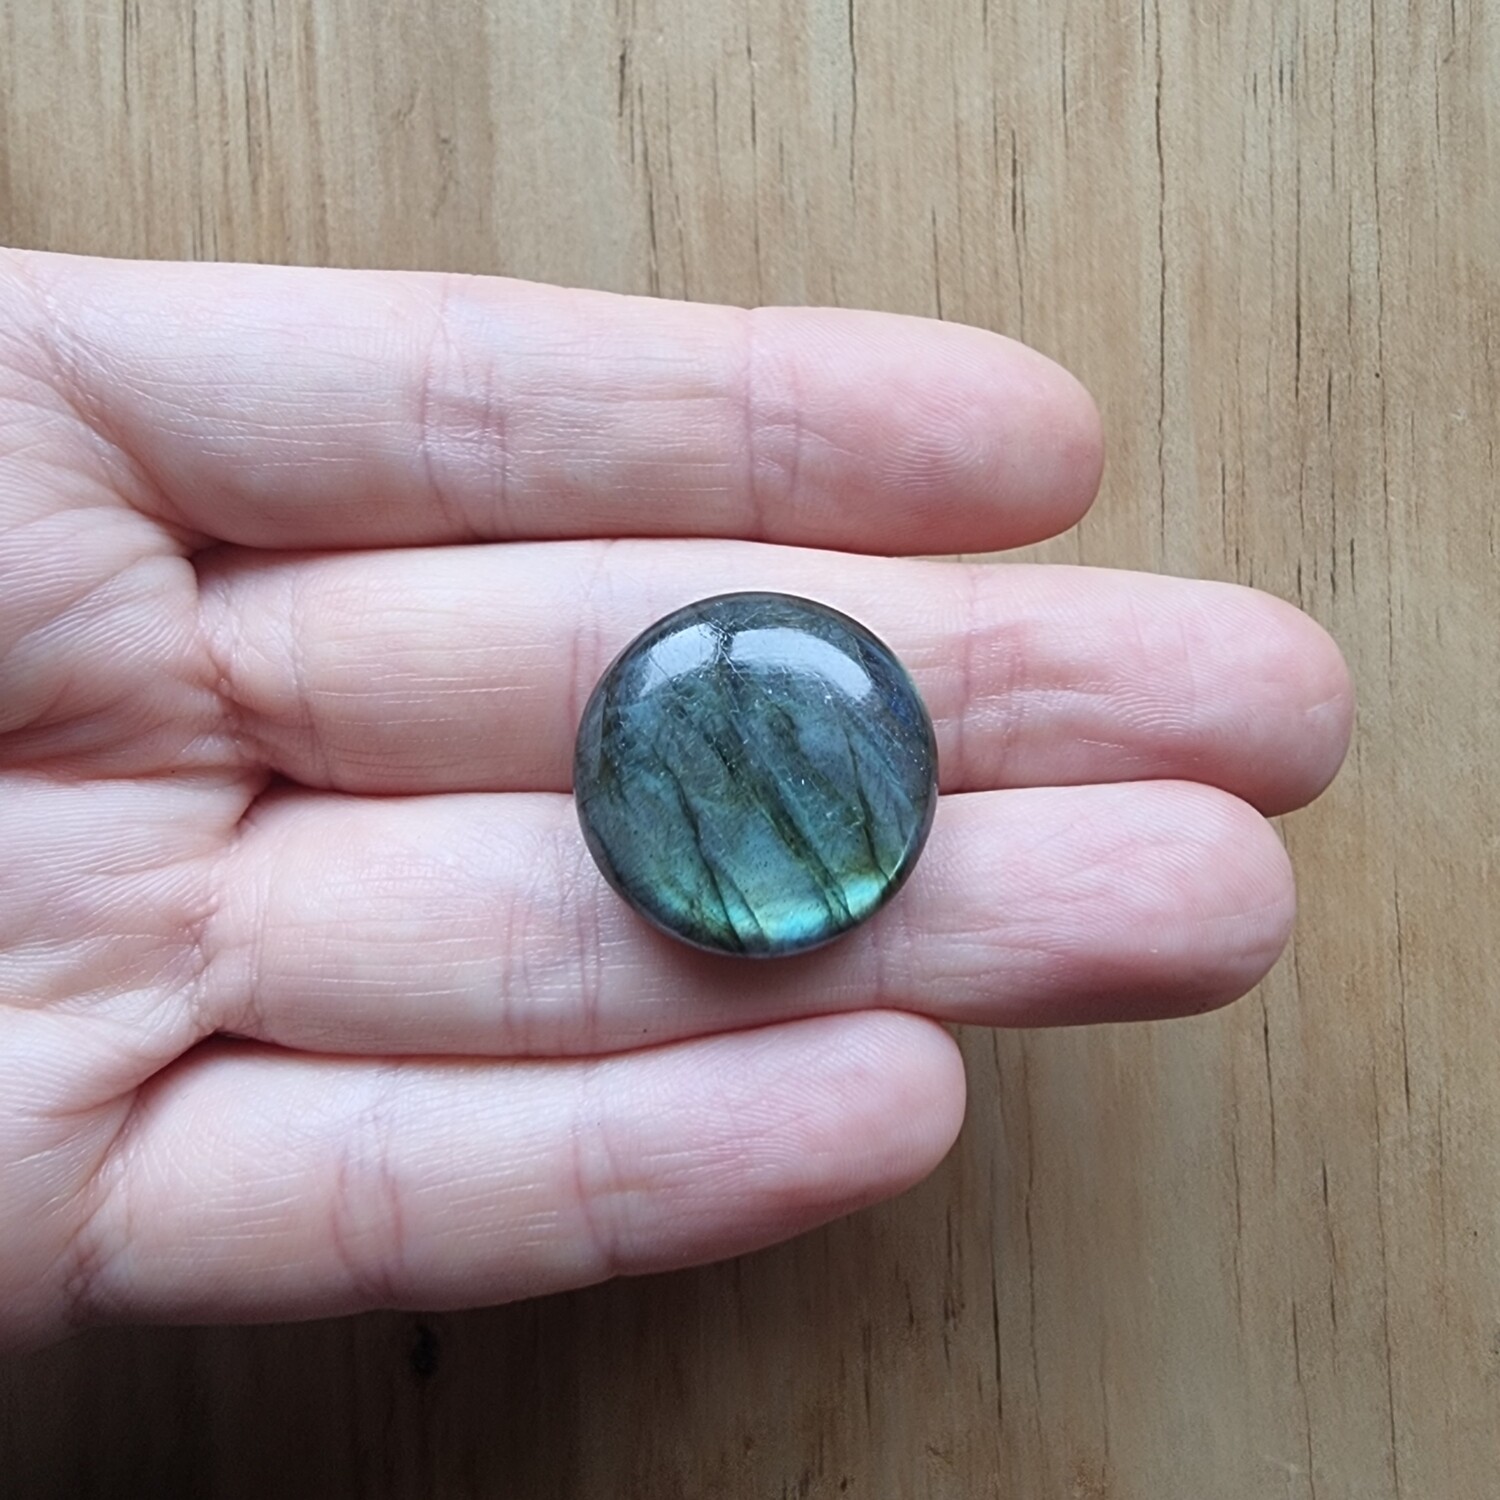 Labradorite Cabochon / Pendant for jewelry making or diy craft projects 11.6gr